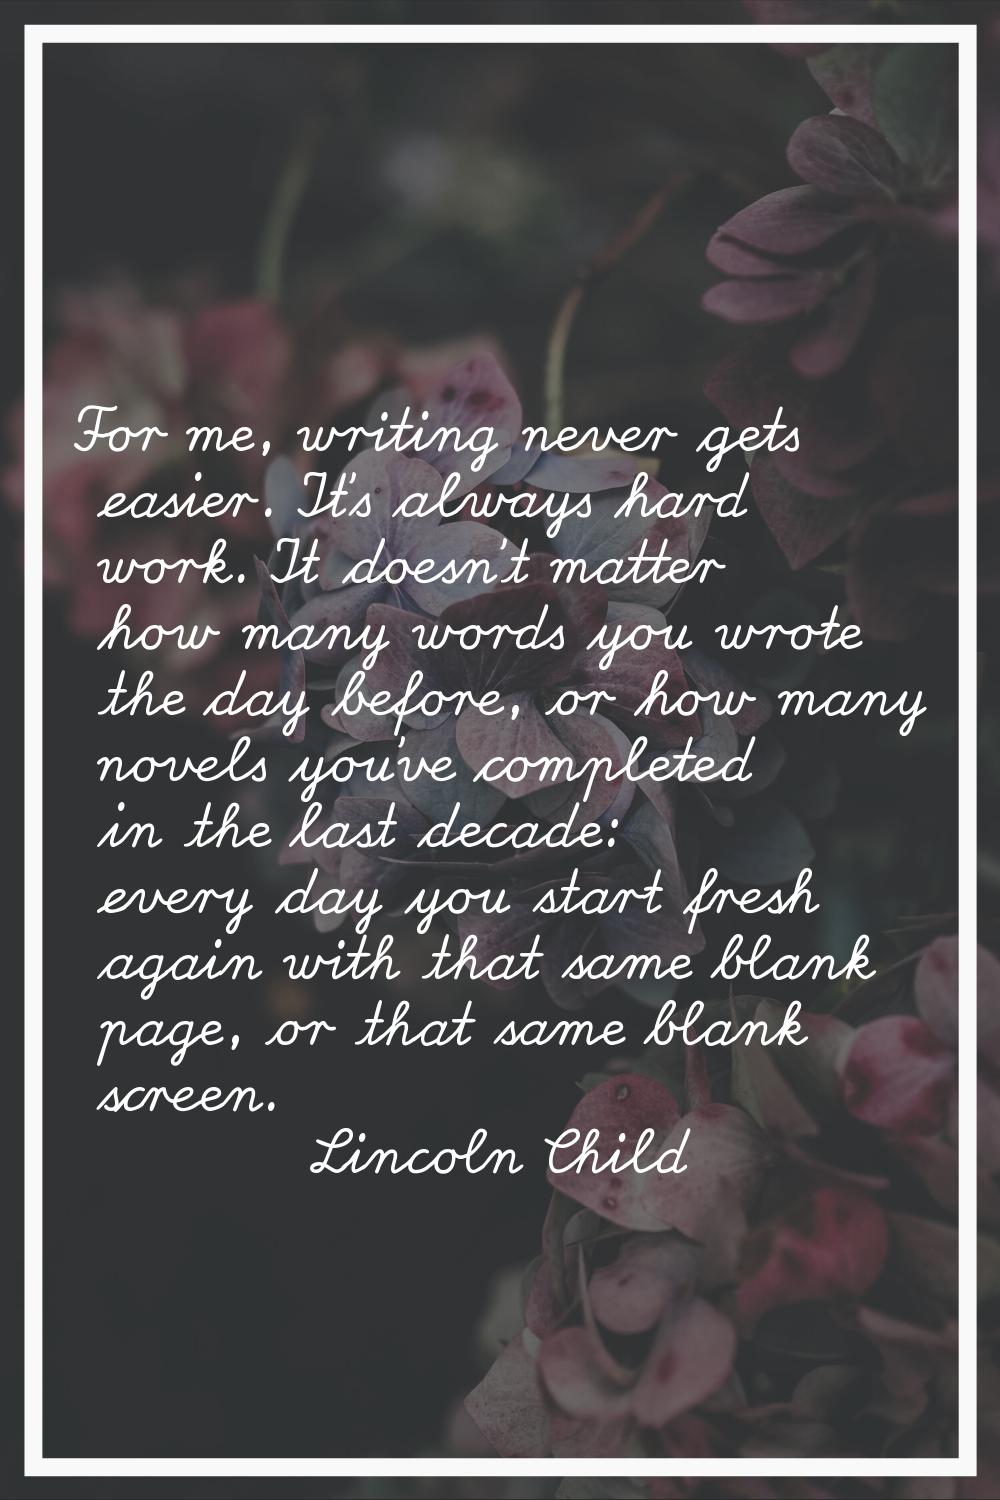 For me, writing never gets easier. It's always hard work. It doesn't matter how many words you wrot